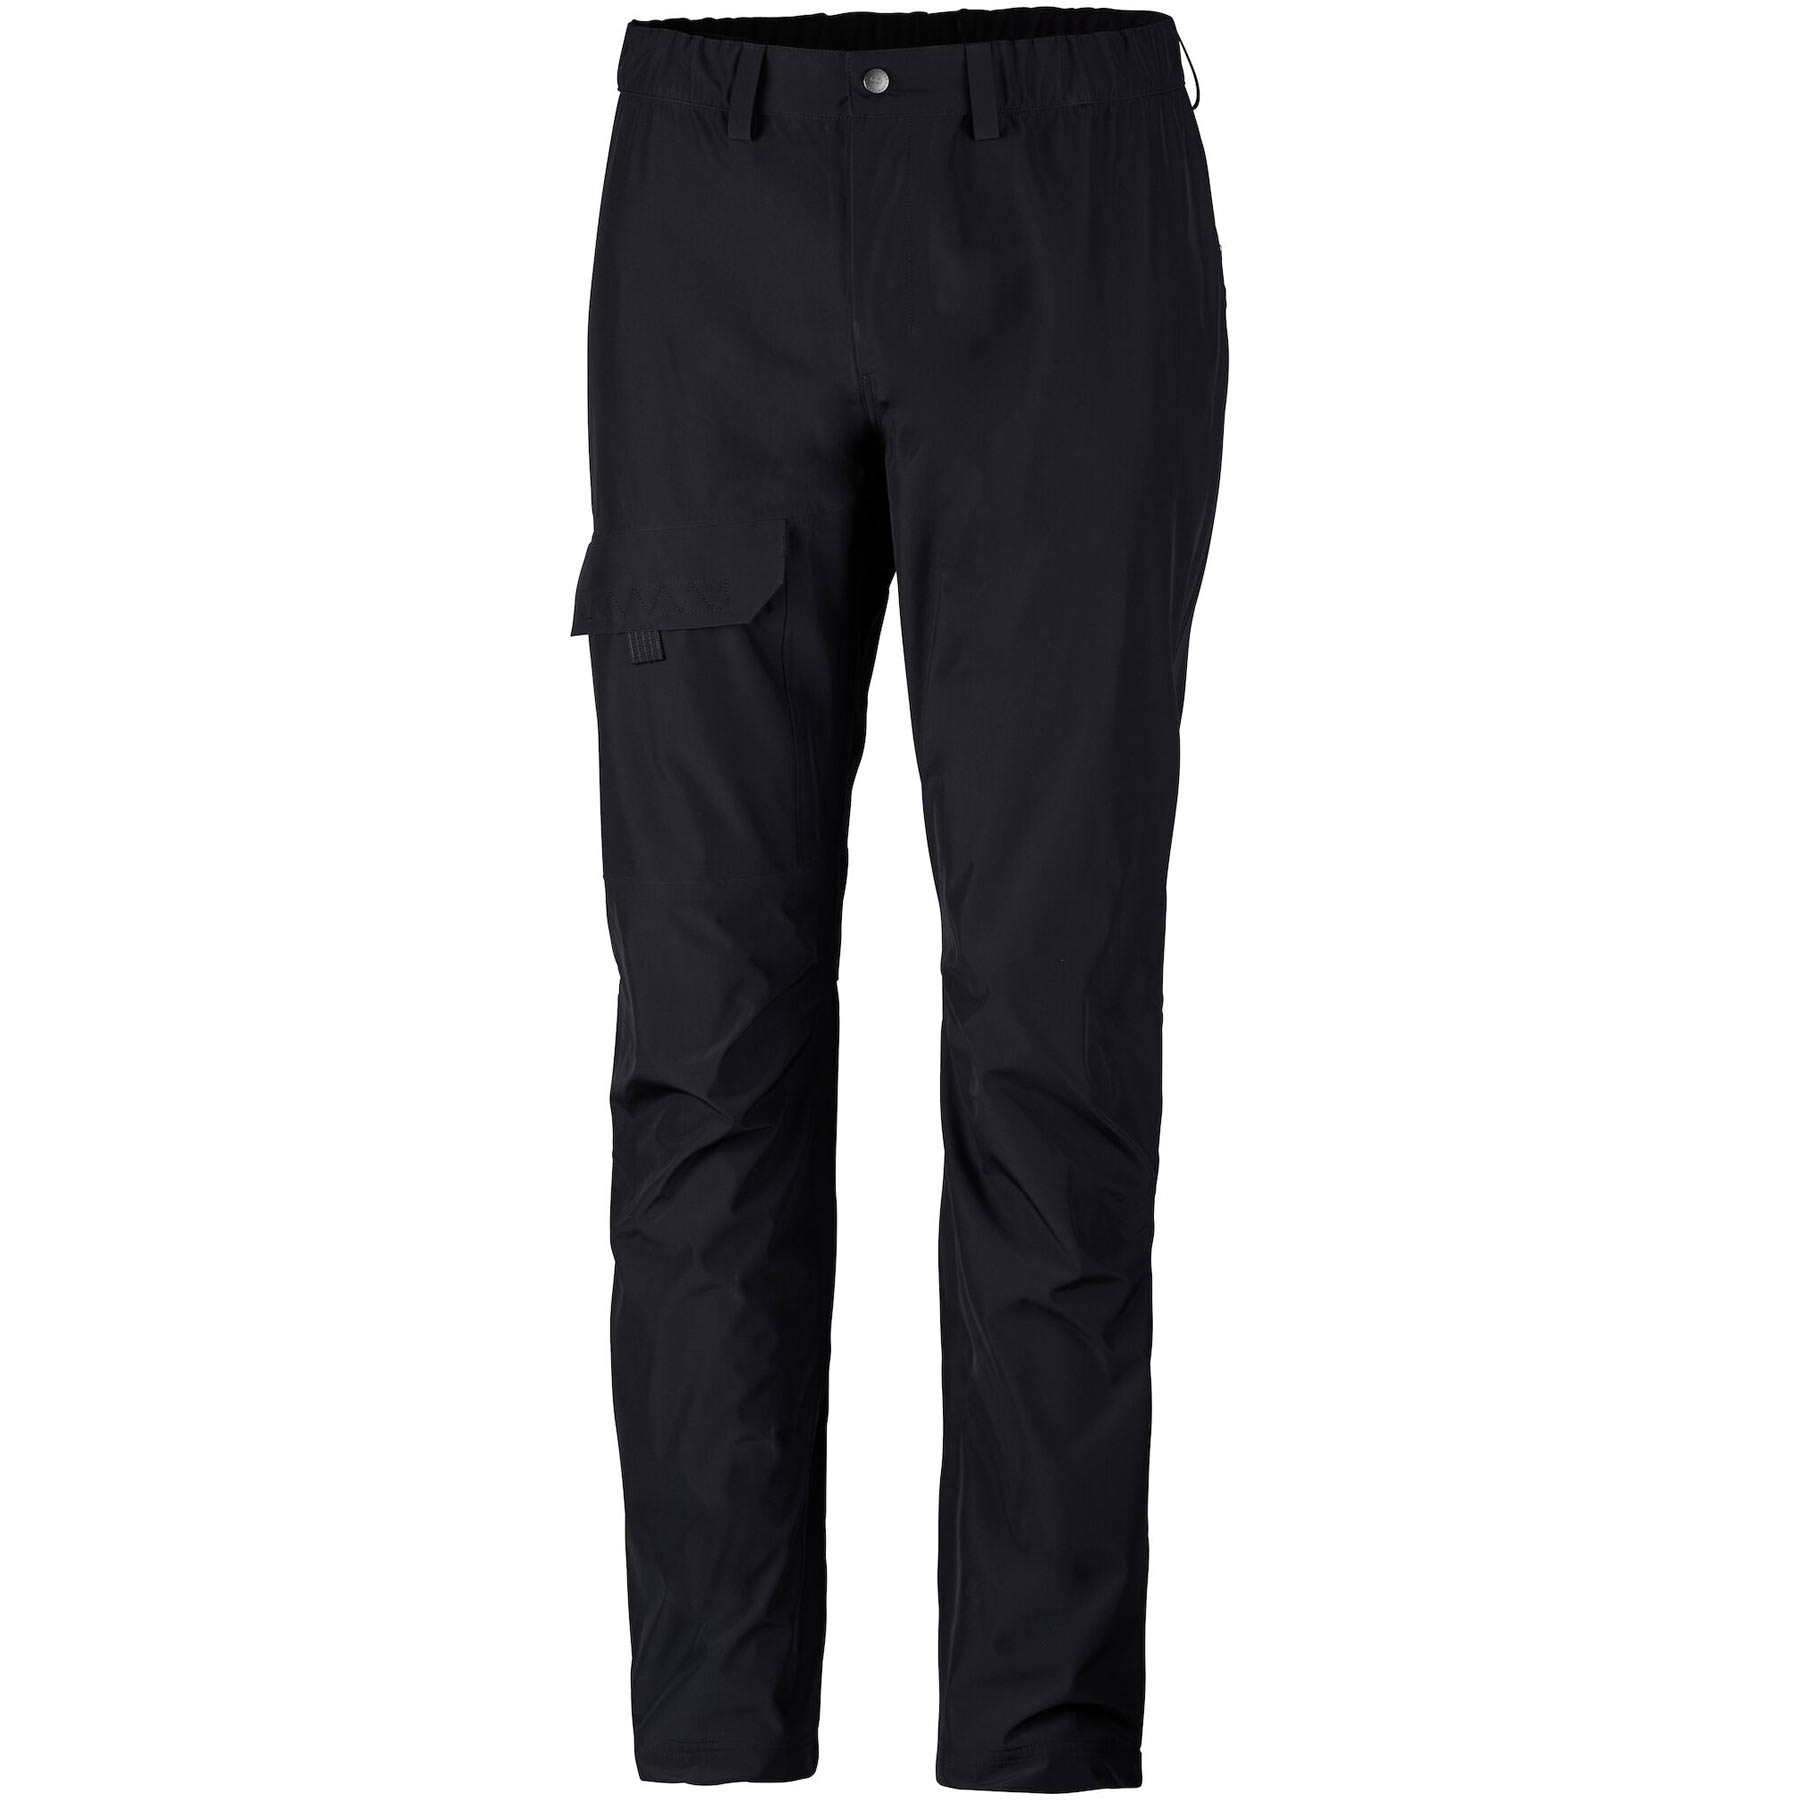 Picture of Lundhags Laka Pants - Black 900